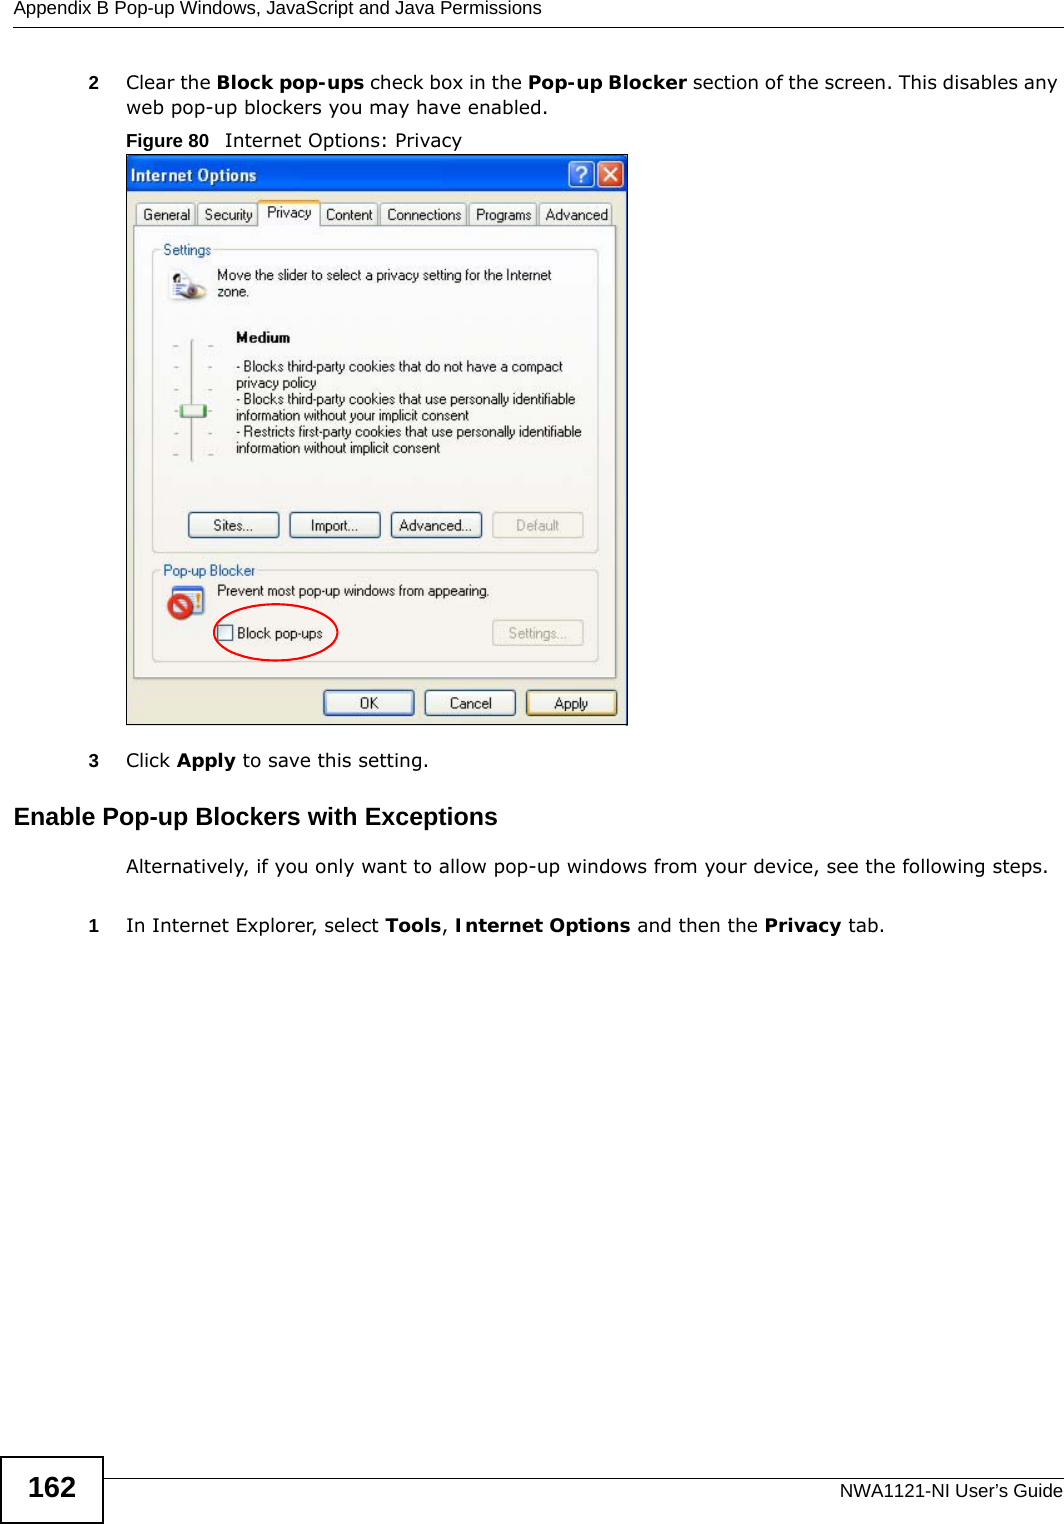 Appendix B Pop-up Windows, JavaScript and Java PermissionsNWA1121-NI User’s Guide1622Clear the Block pop-ups check box in the Pop-up Blocker section of the screen. This disables any web pop-up blockers you may have enabled. Figure 80   Internet Options: Privacy3Click Apply to save this setting.Enable Pop-up Blockers with ExceptionsAlternatively, if you only want to allow pop-up windows from your device, see the following steps.1In Internet Explorer, select Tools, Internet Options and then the Privacy tab. 